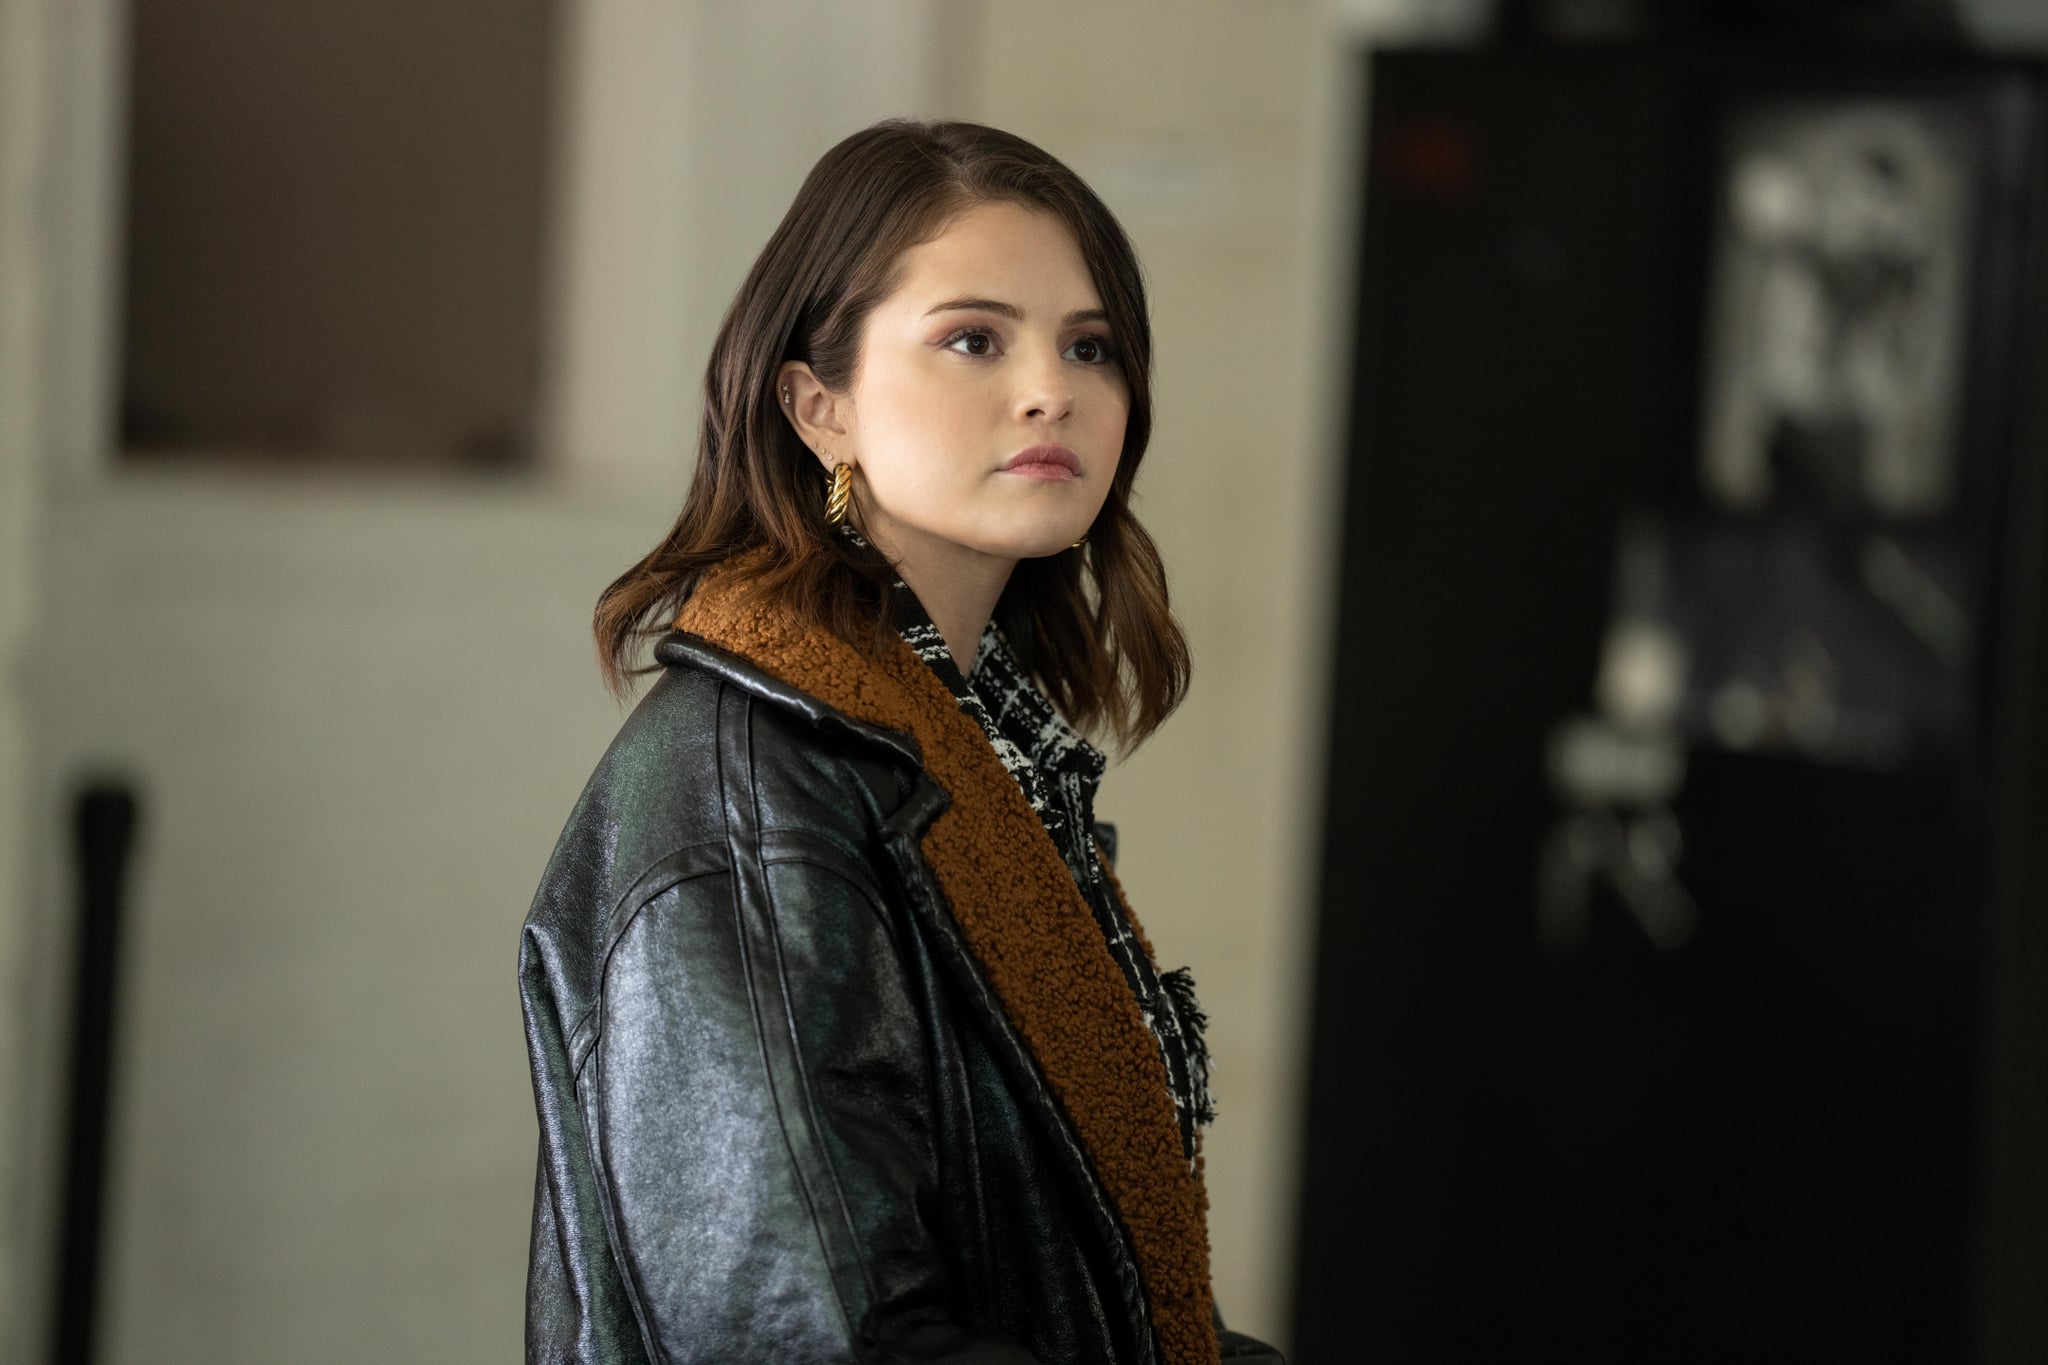 Only Murders In The Building -- Sparring Partners - Episode 209 -- Closing in on the killer, Mabel takes her investigative talents into the ring.  Oliver and Charles duke it out over a birdcage only to end up confronting their deepest paternal struggles. Mabel (Selena Gomez), shown. (Photo by: Craig Blankenhorn/Hulu)